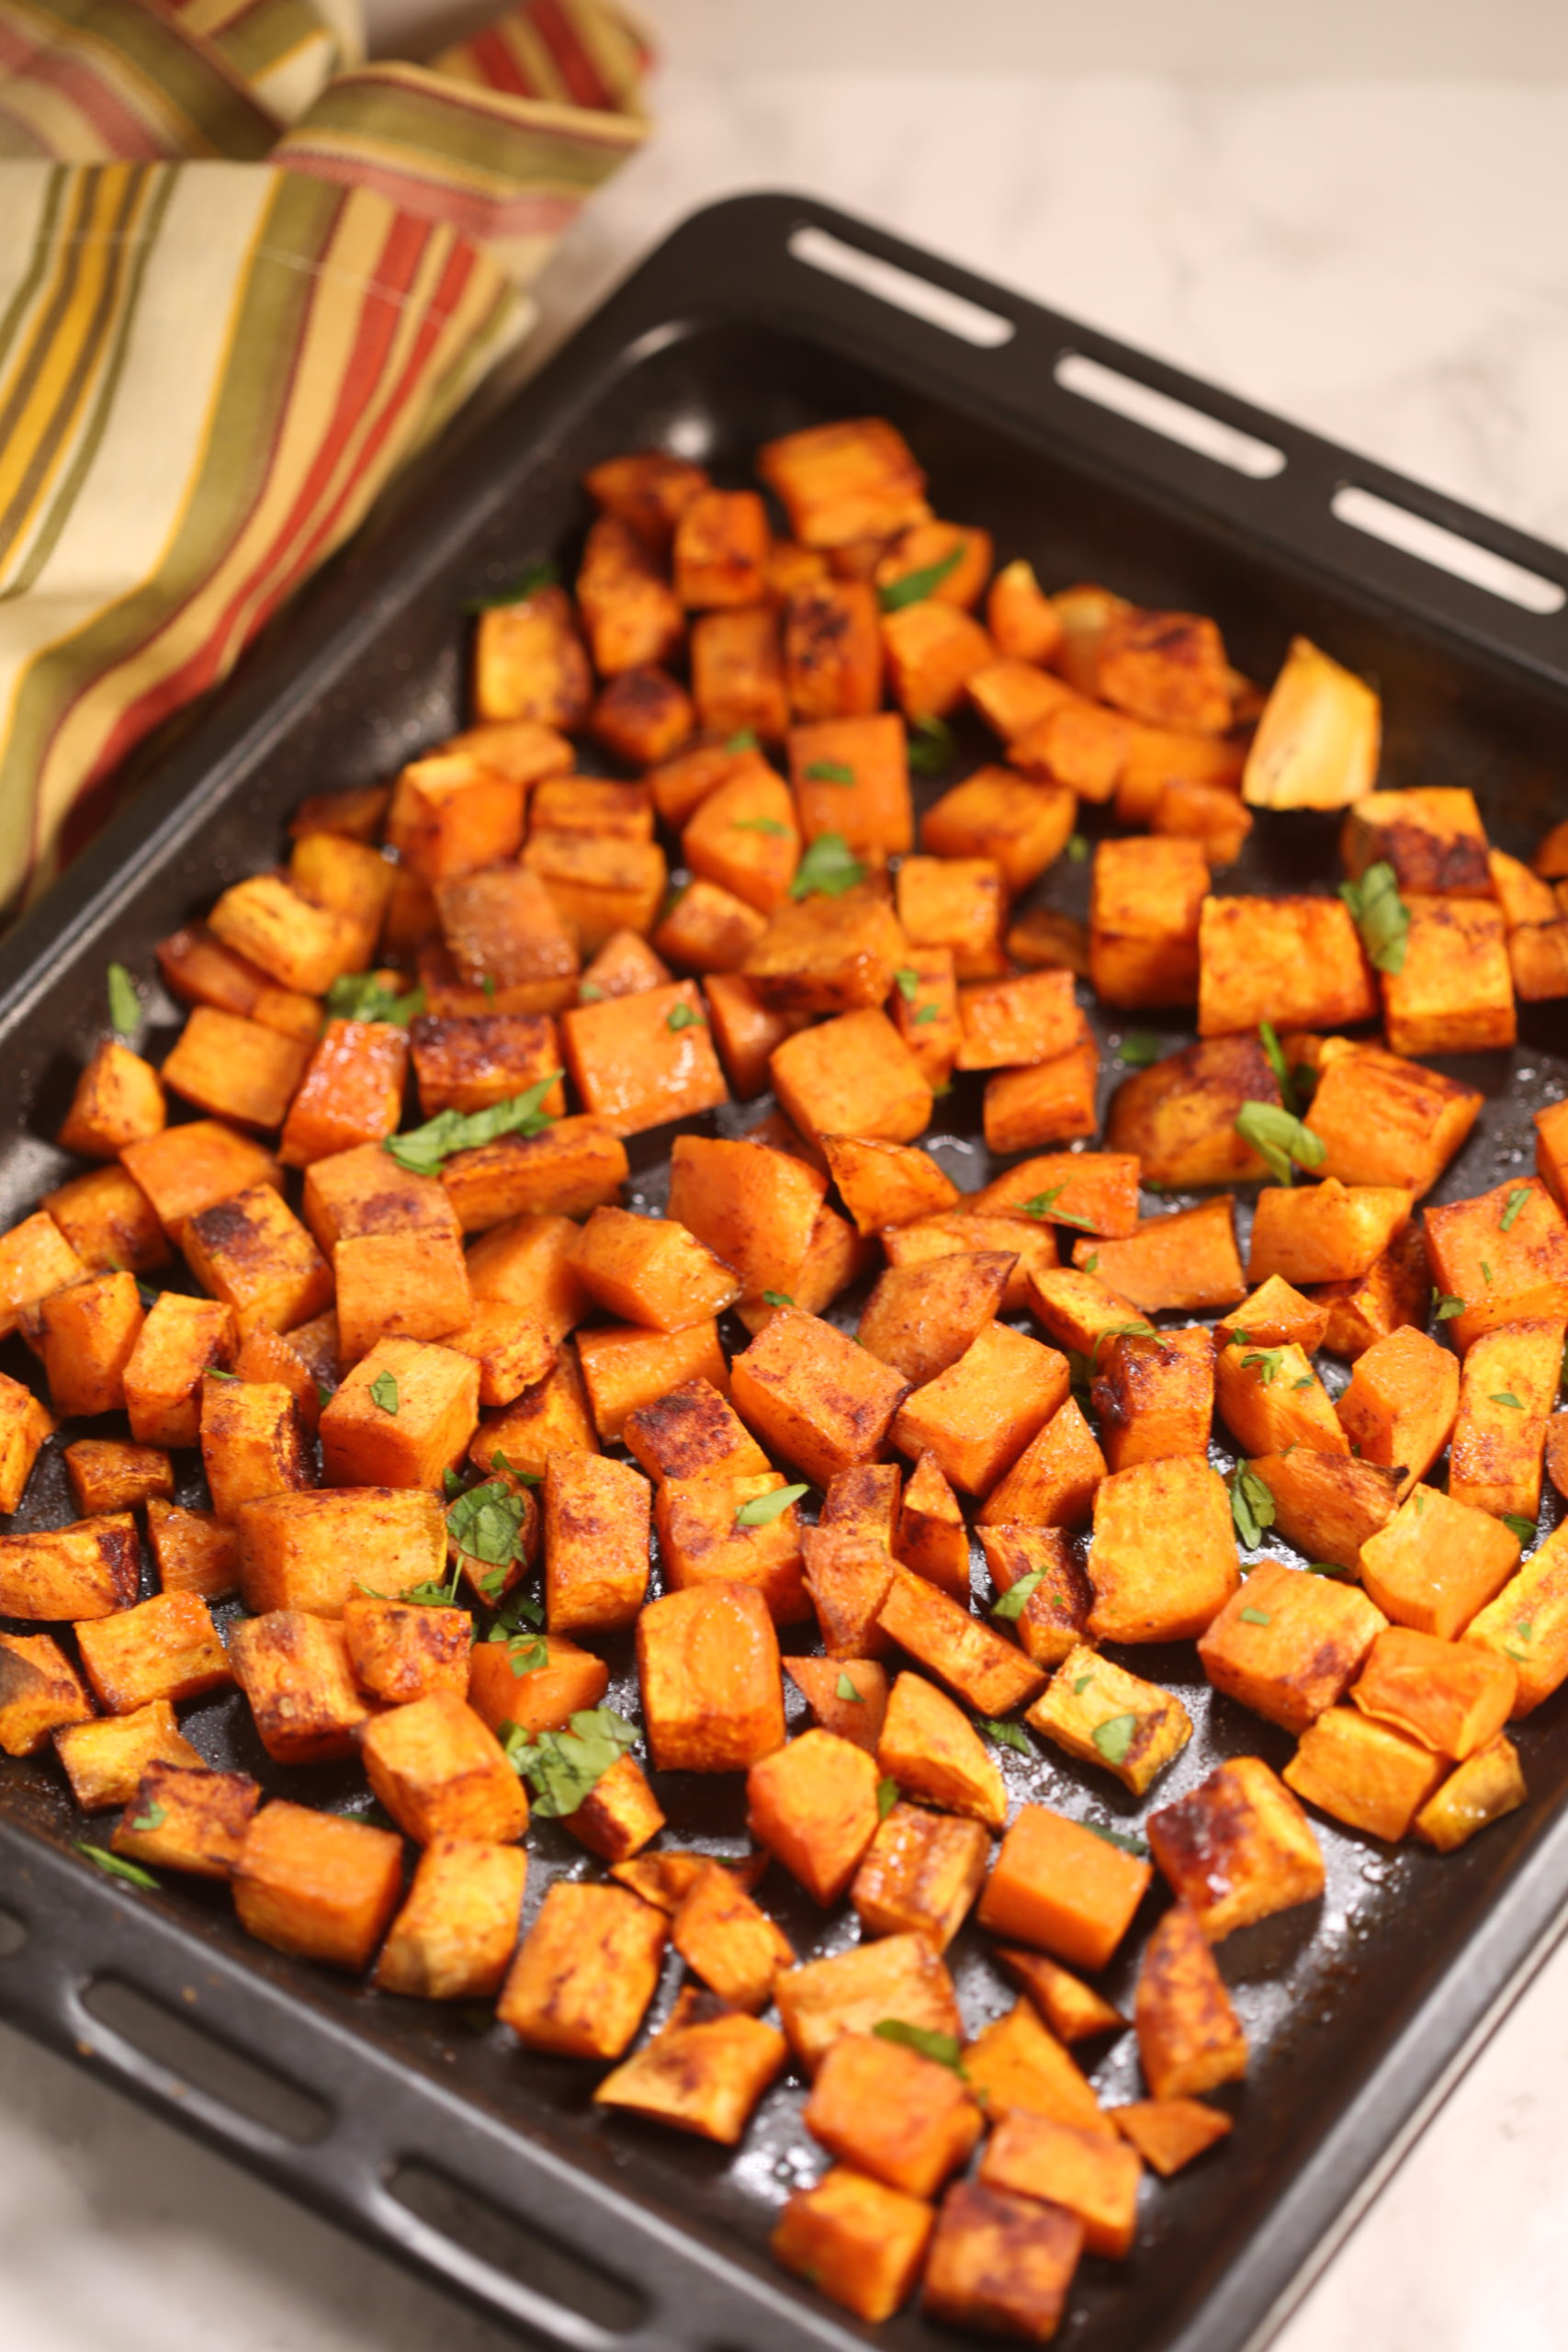 A tray with cubed sweet potatoes on them.